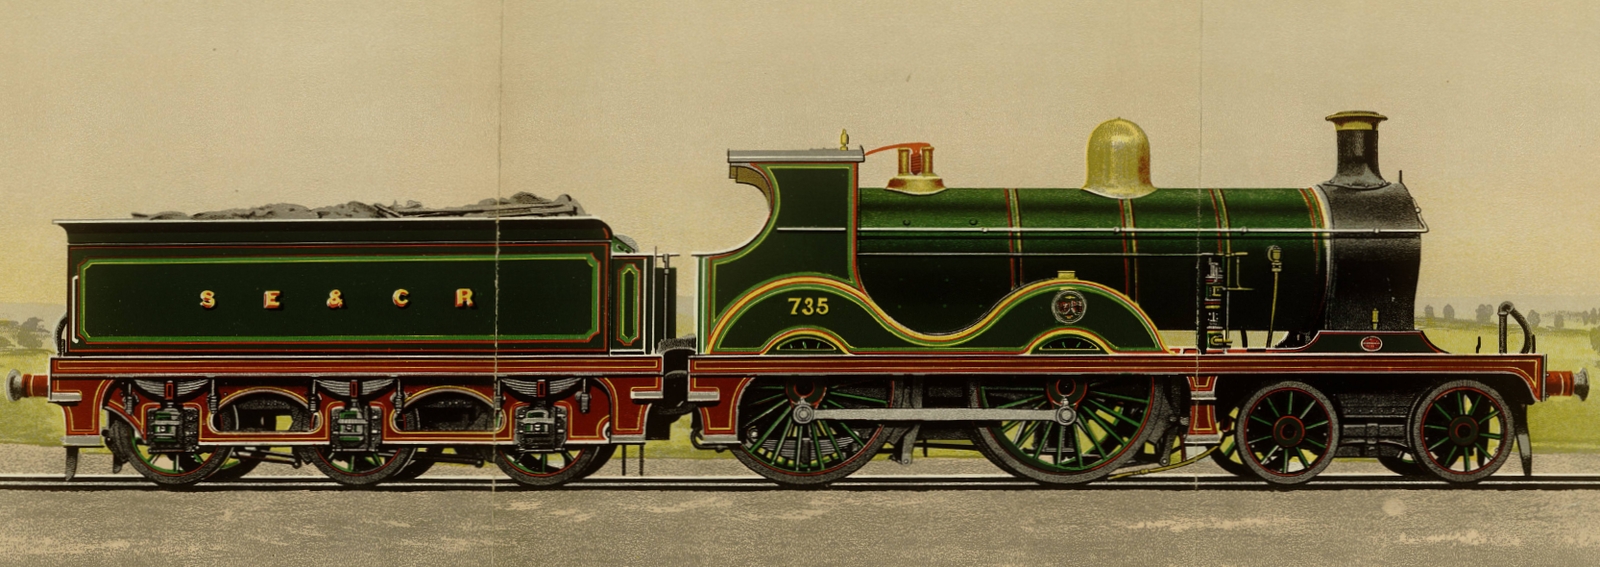 No. 735 with round-topped firebox